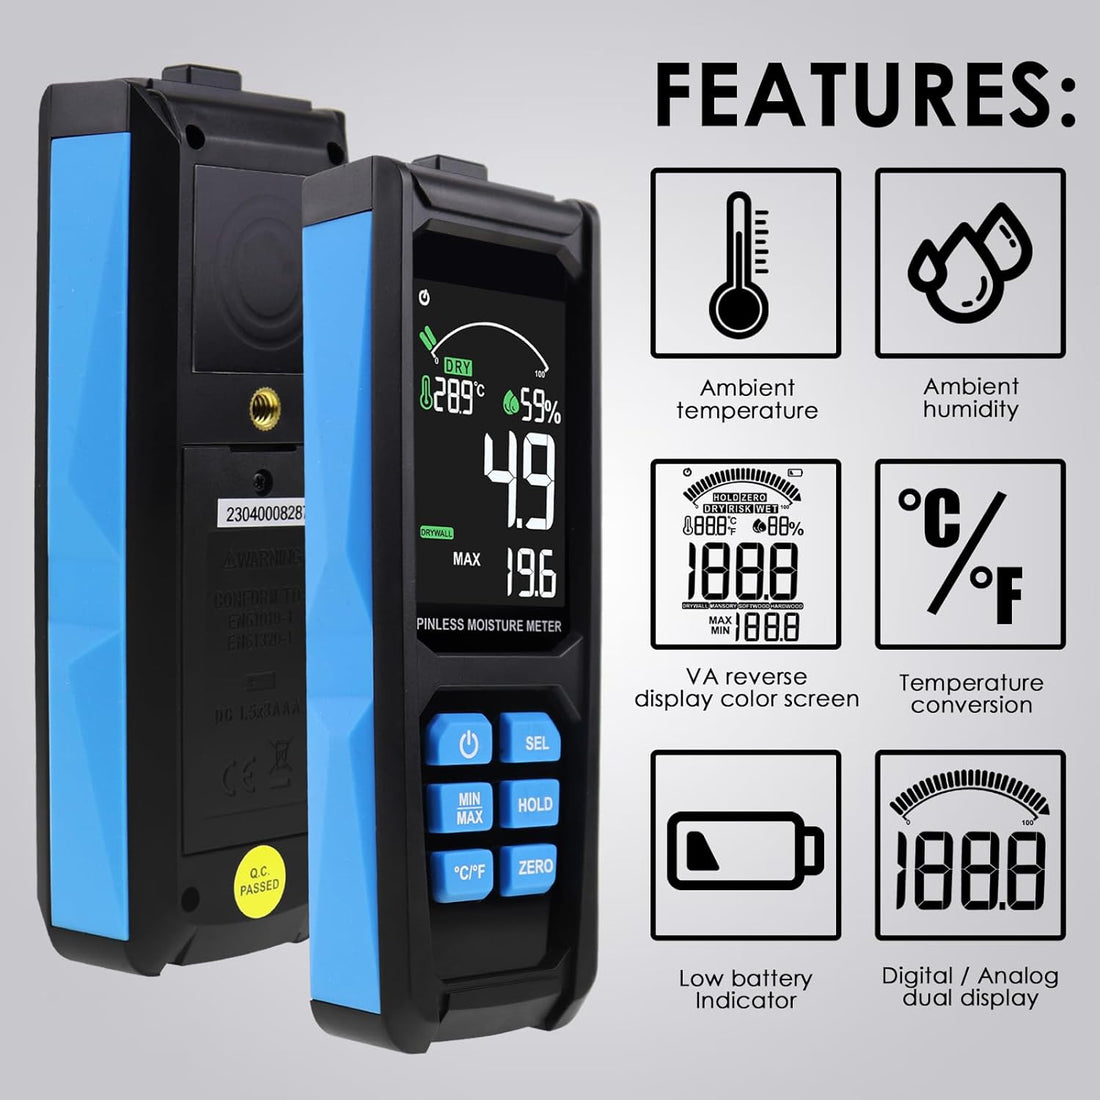 Pinless Moisture Meter, Drywall Moisture Detector with Backlit Color LCD Display for Dampness Detection in Plaster, Wood, and Concrete,Accurate Wall Moisture Sensor Digital Humidity Tester